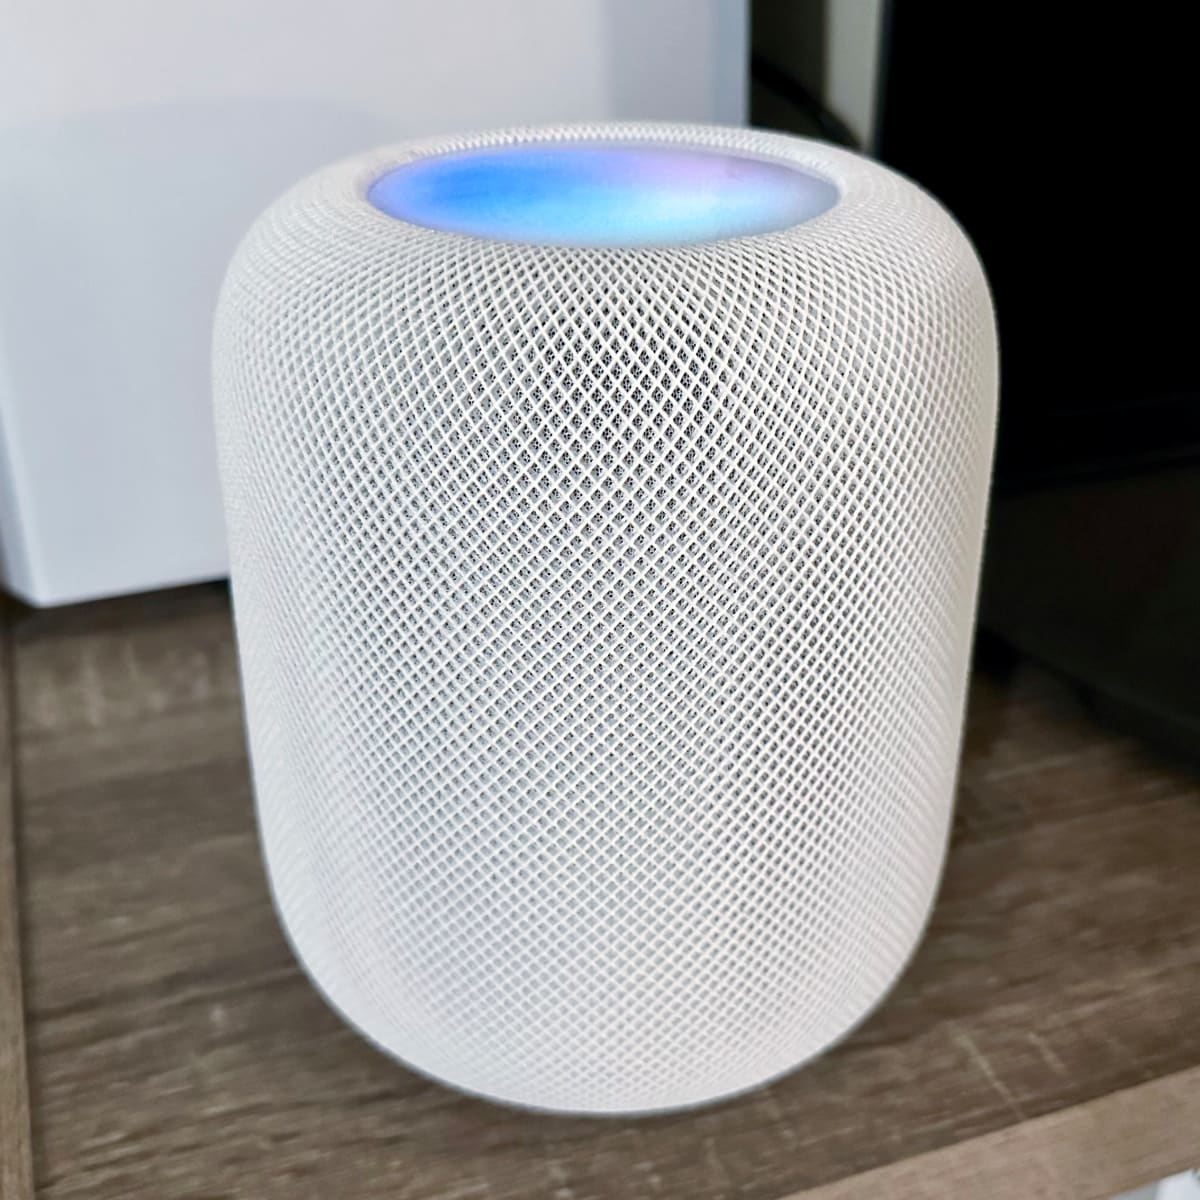 HomePod 2 concept brings iPod click wheel to Apple's speaker